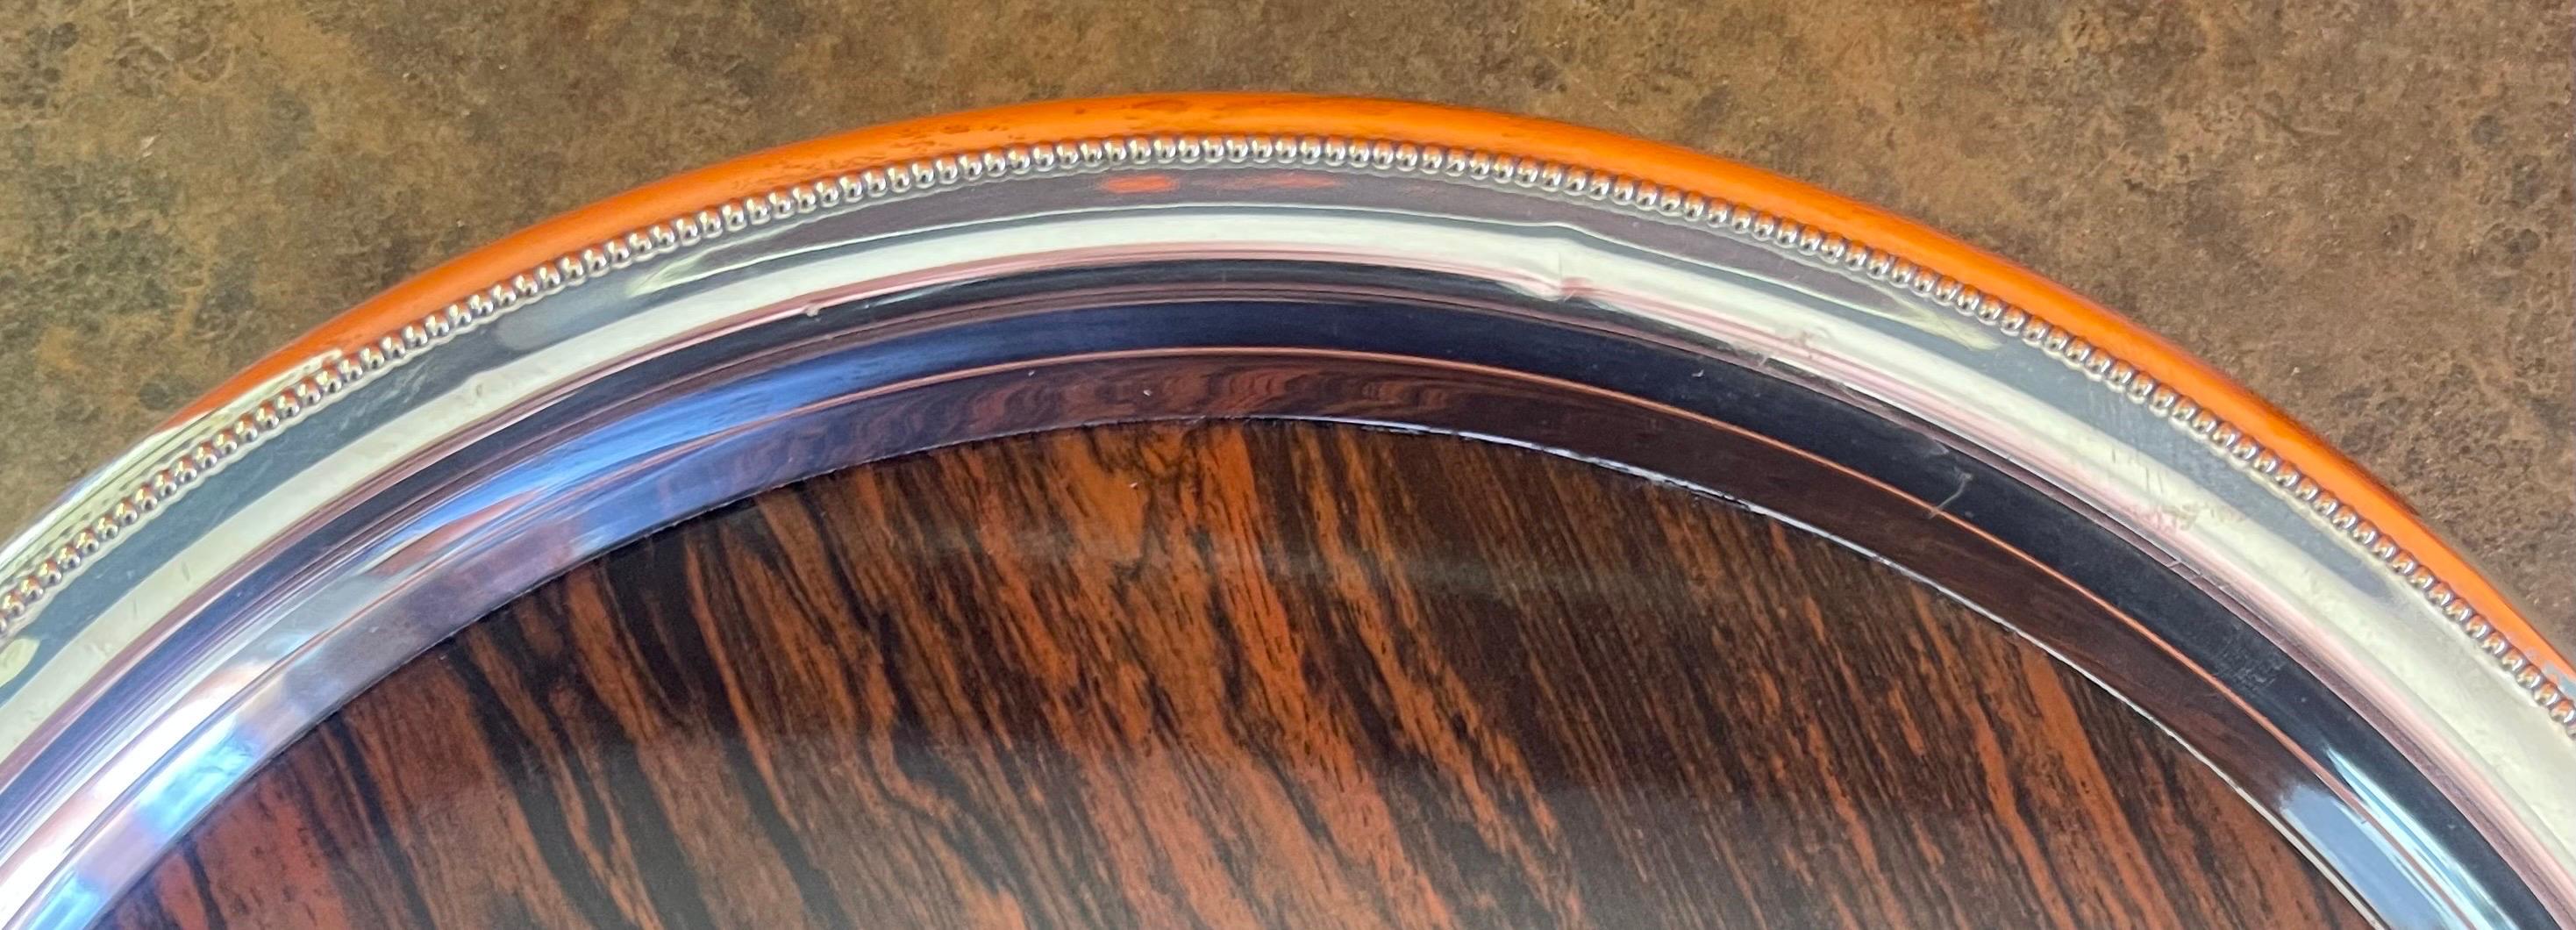 MCM Silverplate & Rosewood Formica Serving Tray by Sheffield Silver Co In Good Condition For Sale In San Diego, CA